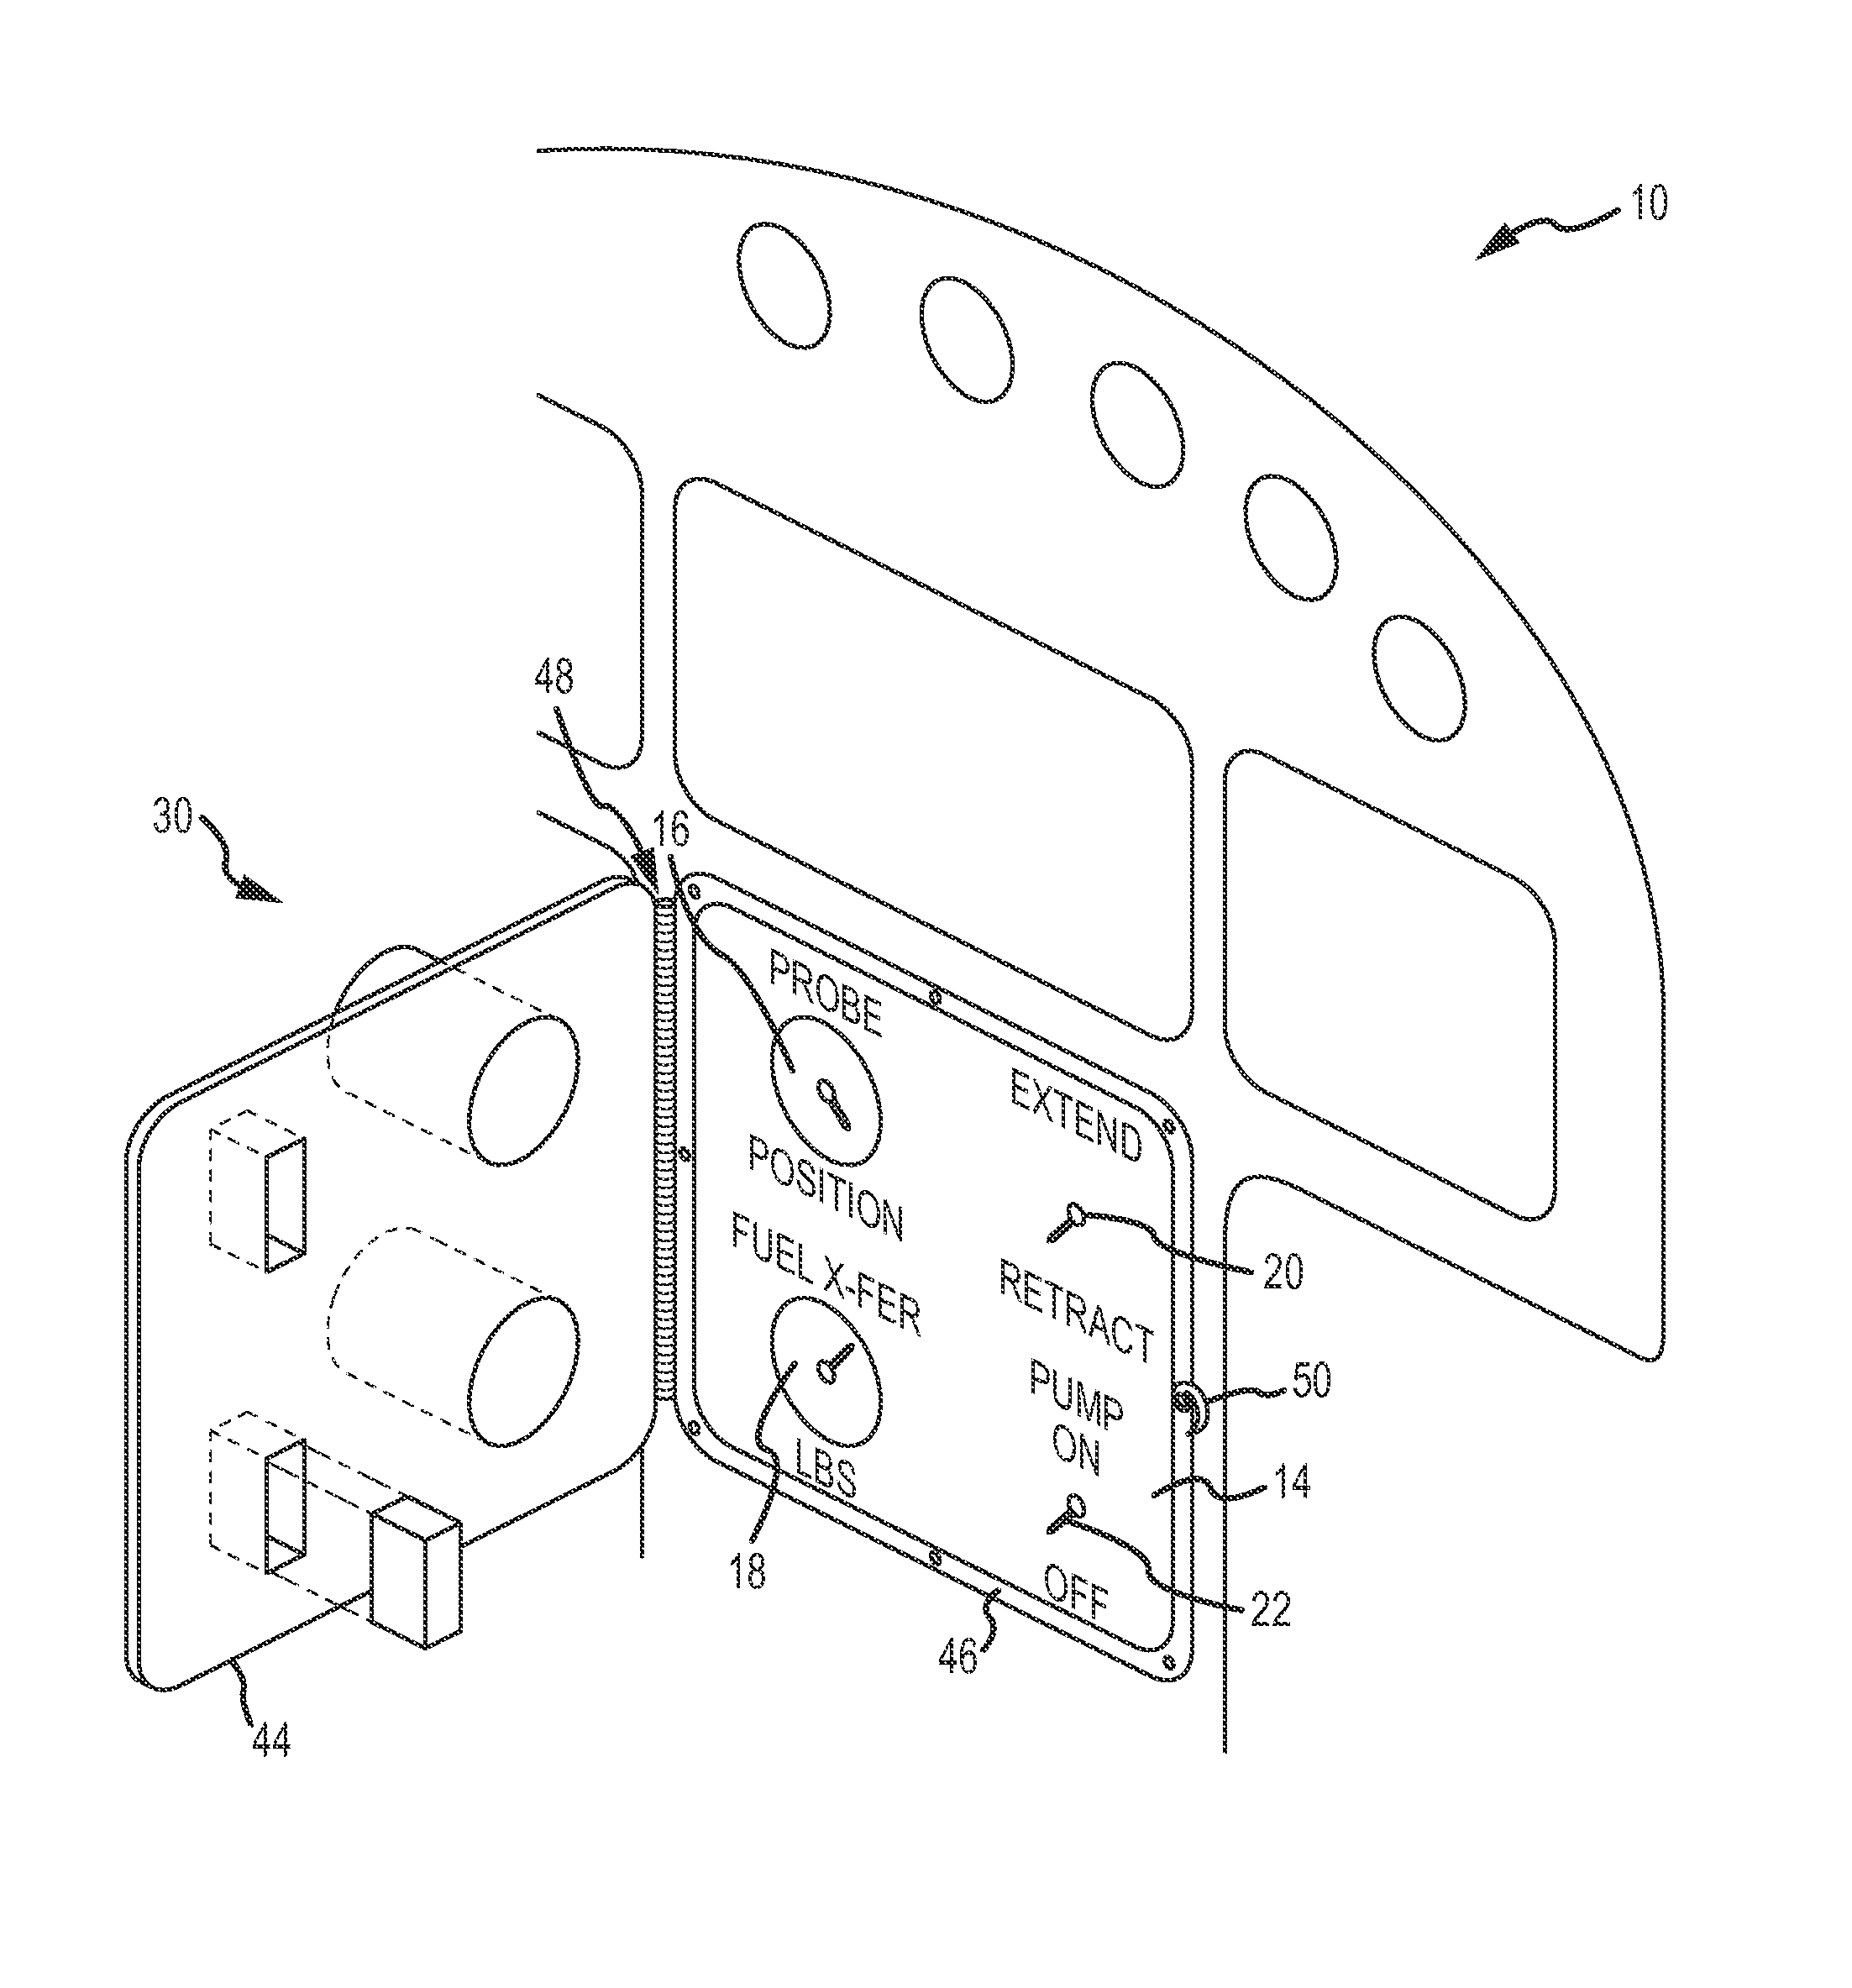 Remote actuation system for a human/machine interface